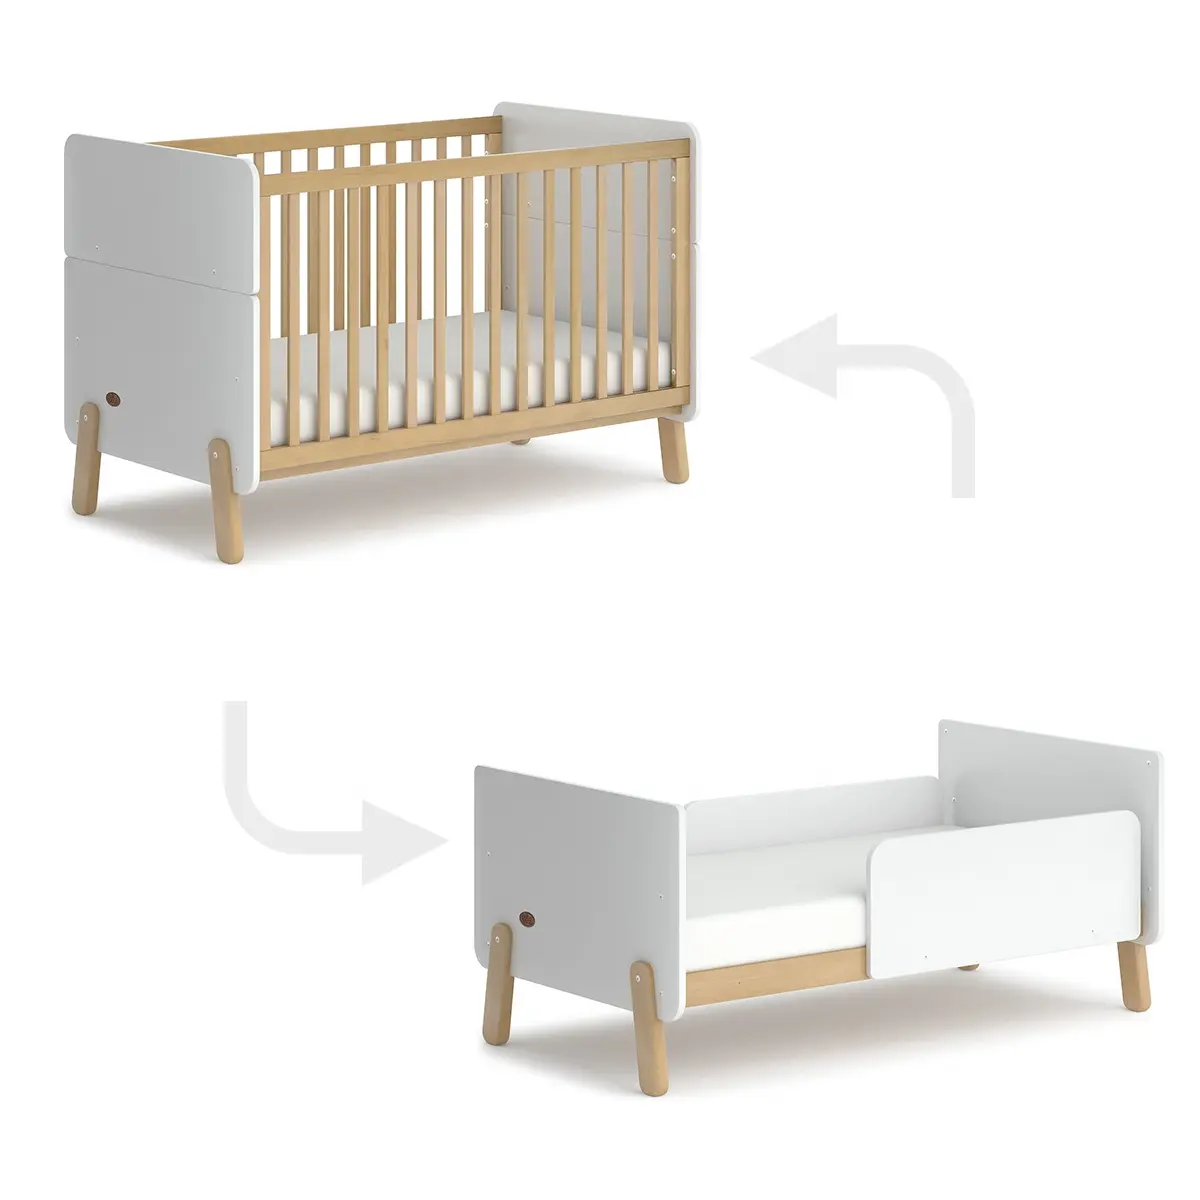 Boori 3 In 1 Crib Single Convertible Wooden Baby Cot Bed for Baby 0-3 Years